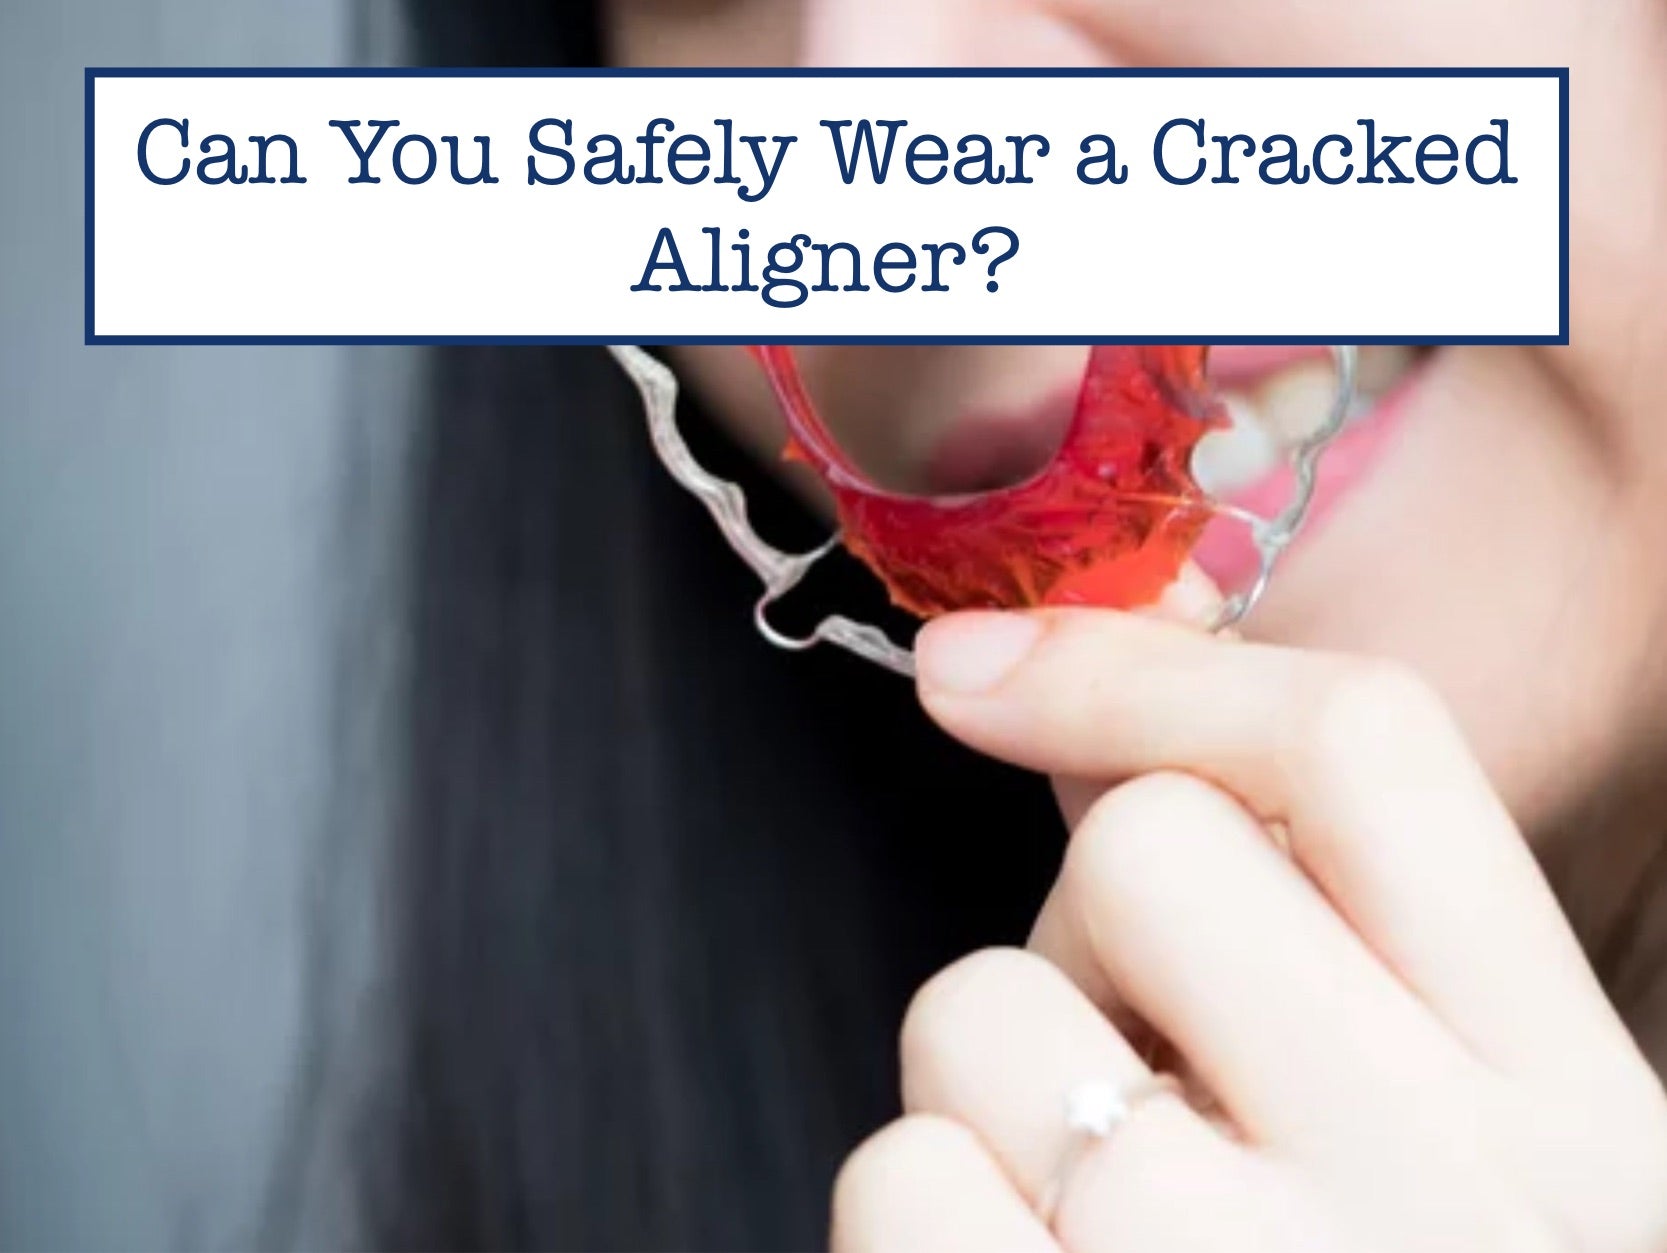 Can You Safely Wear a Cracked Aligner?